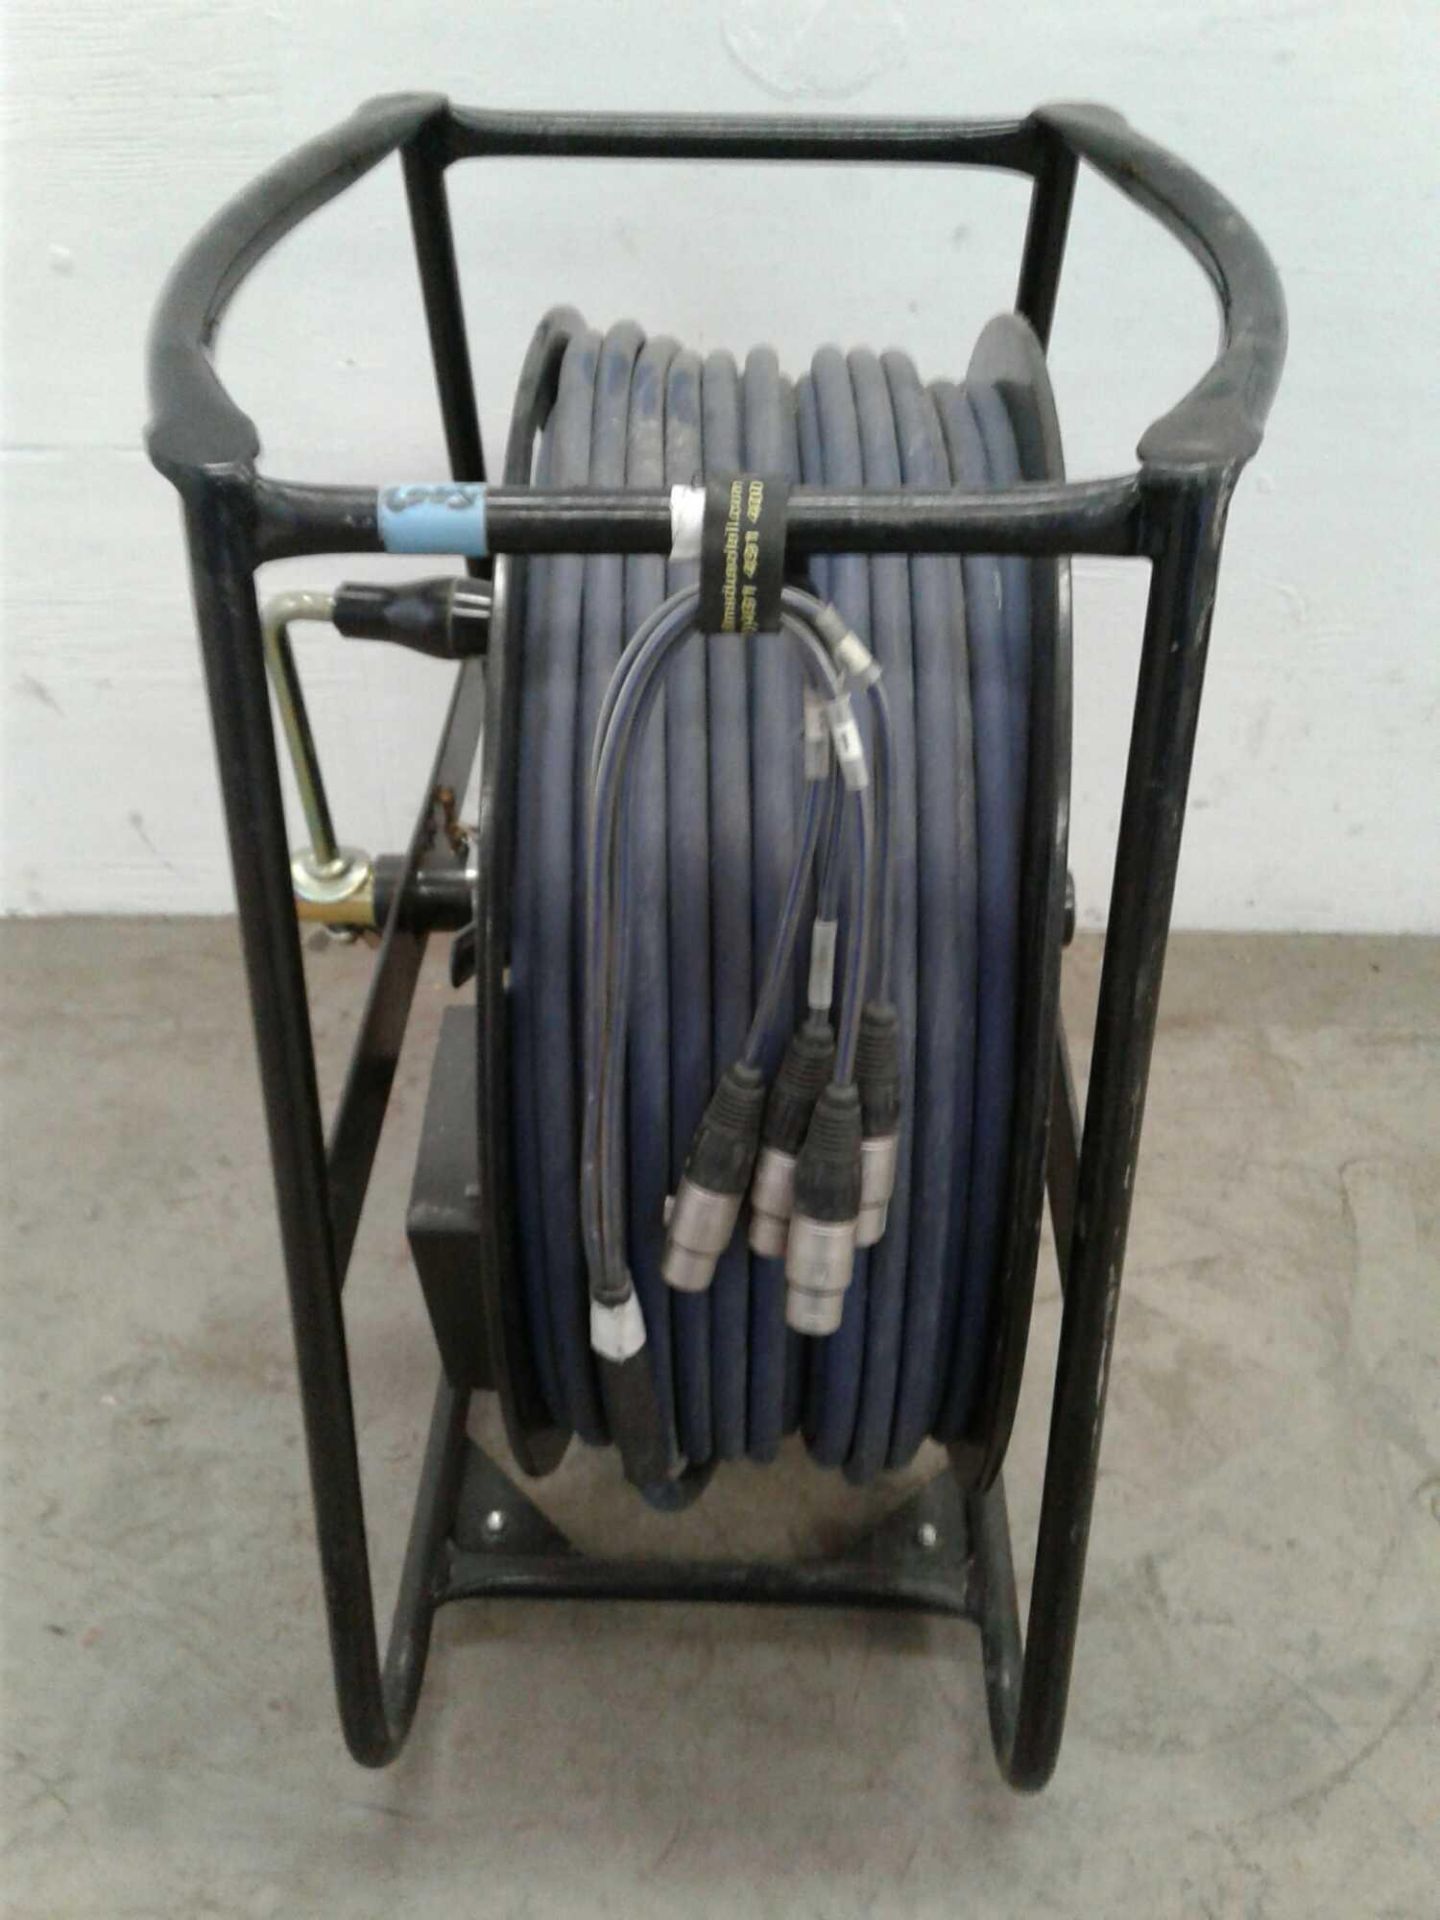 3 din female plug speaker cable 120 mtr cable reel - Image 2 of 2